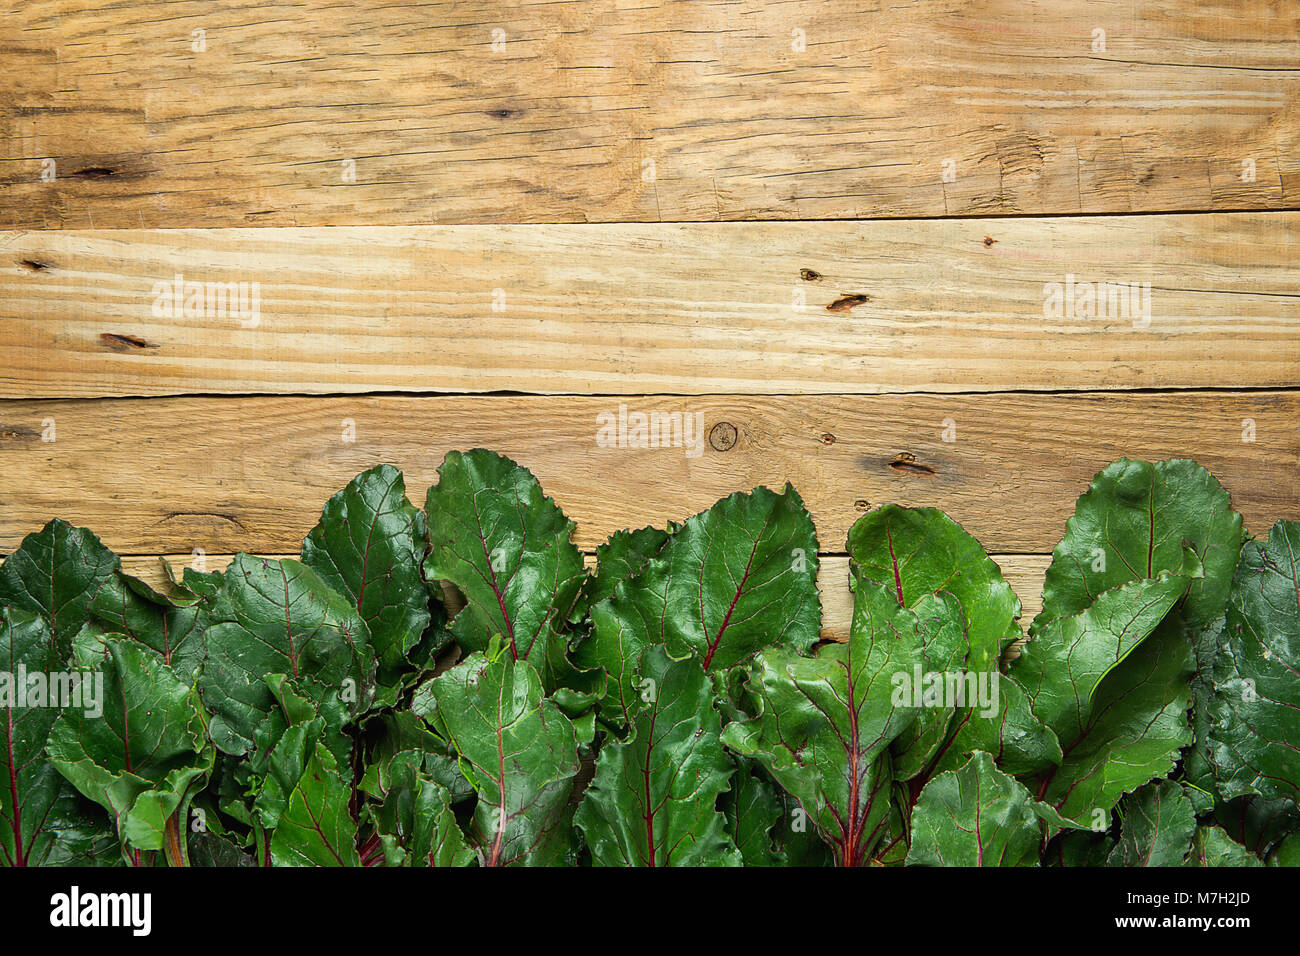 Bunch of Fresh Crispy Green Beet Leaves Arranged as Bottom Border on Aged Plank Wood Background. Healthy Vegan Diet Vitamins Concept. High resolution  Stock Photo